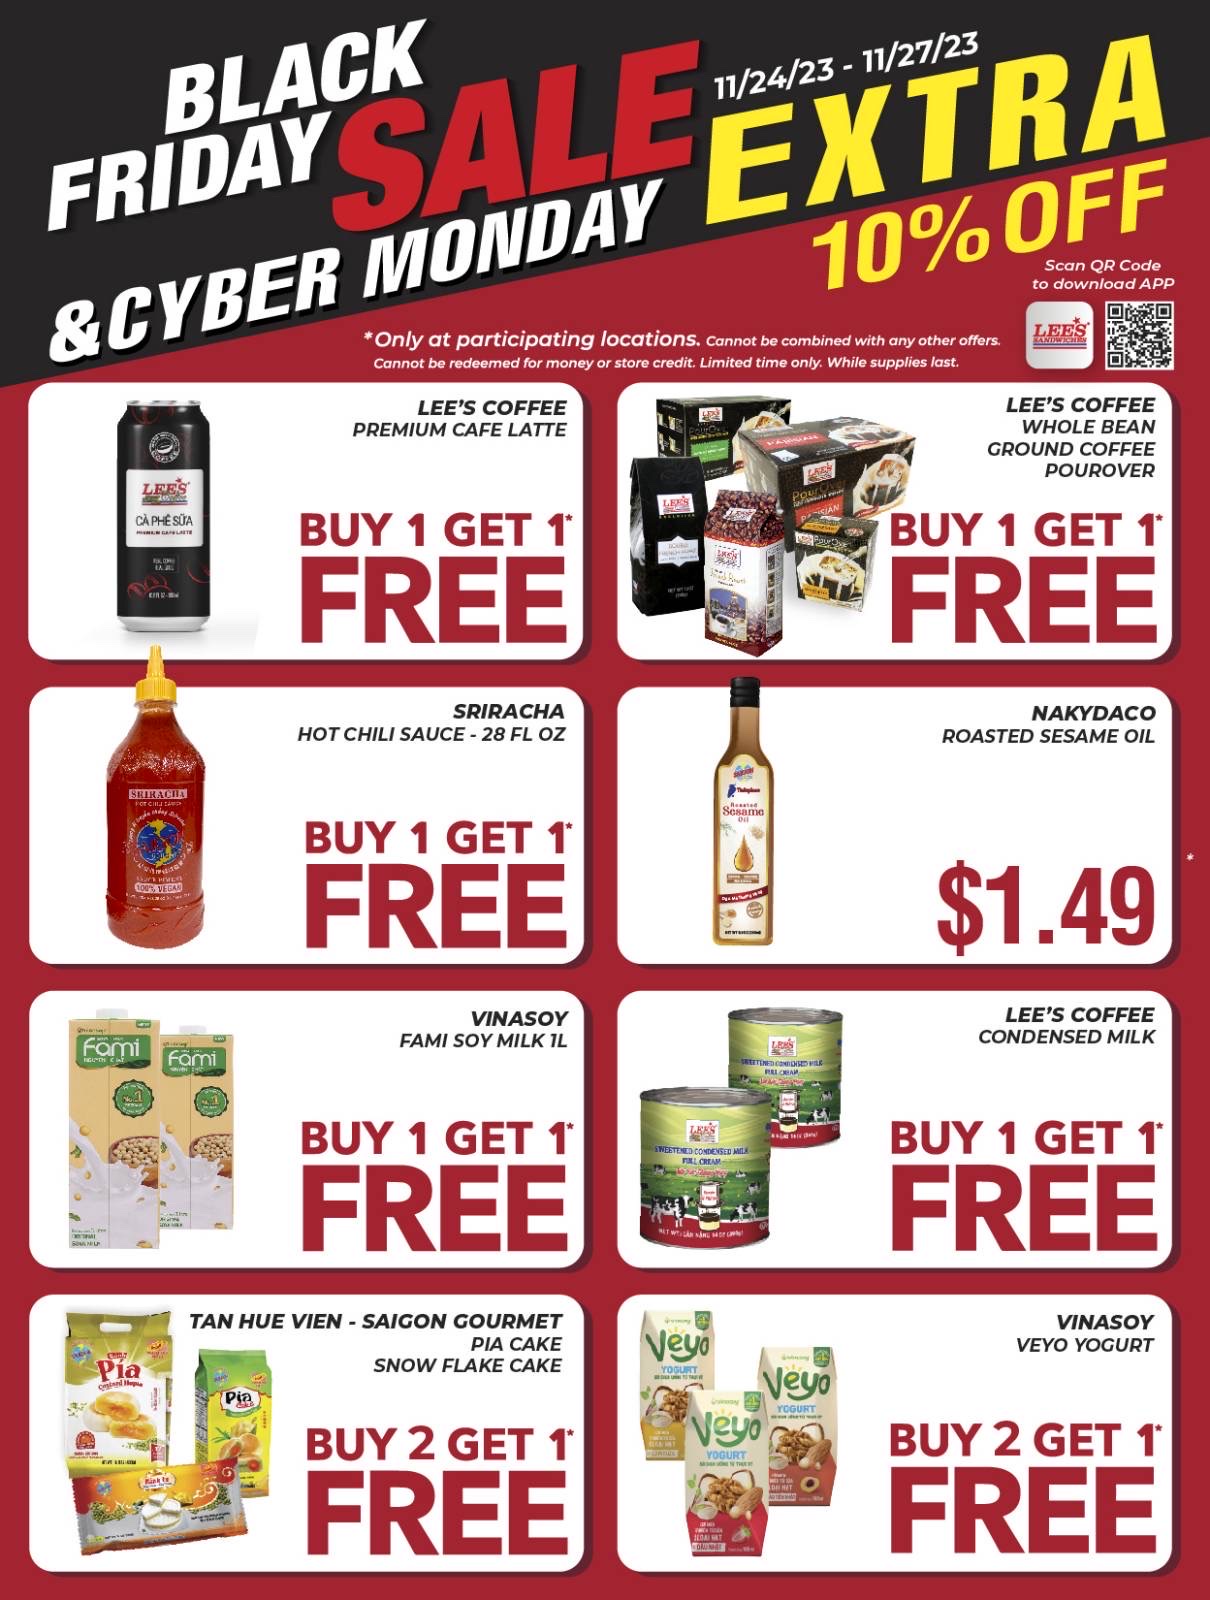 Black Friday & Cyber Monday Mega Sale!!! Only from 11/24/23 to 11/27/23 at participating locations